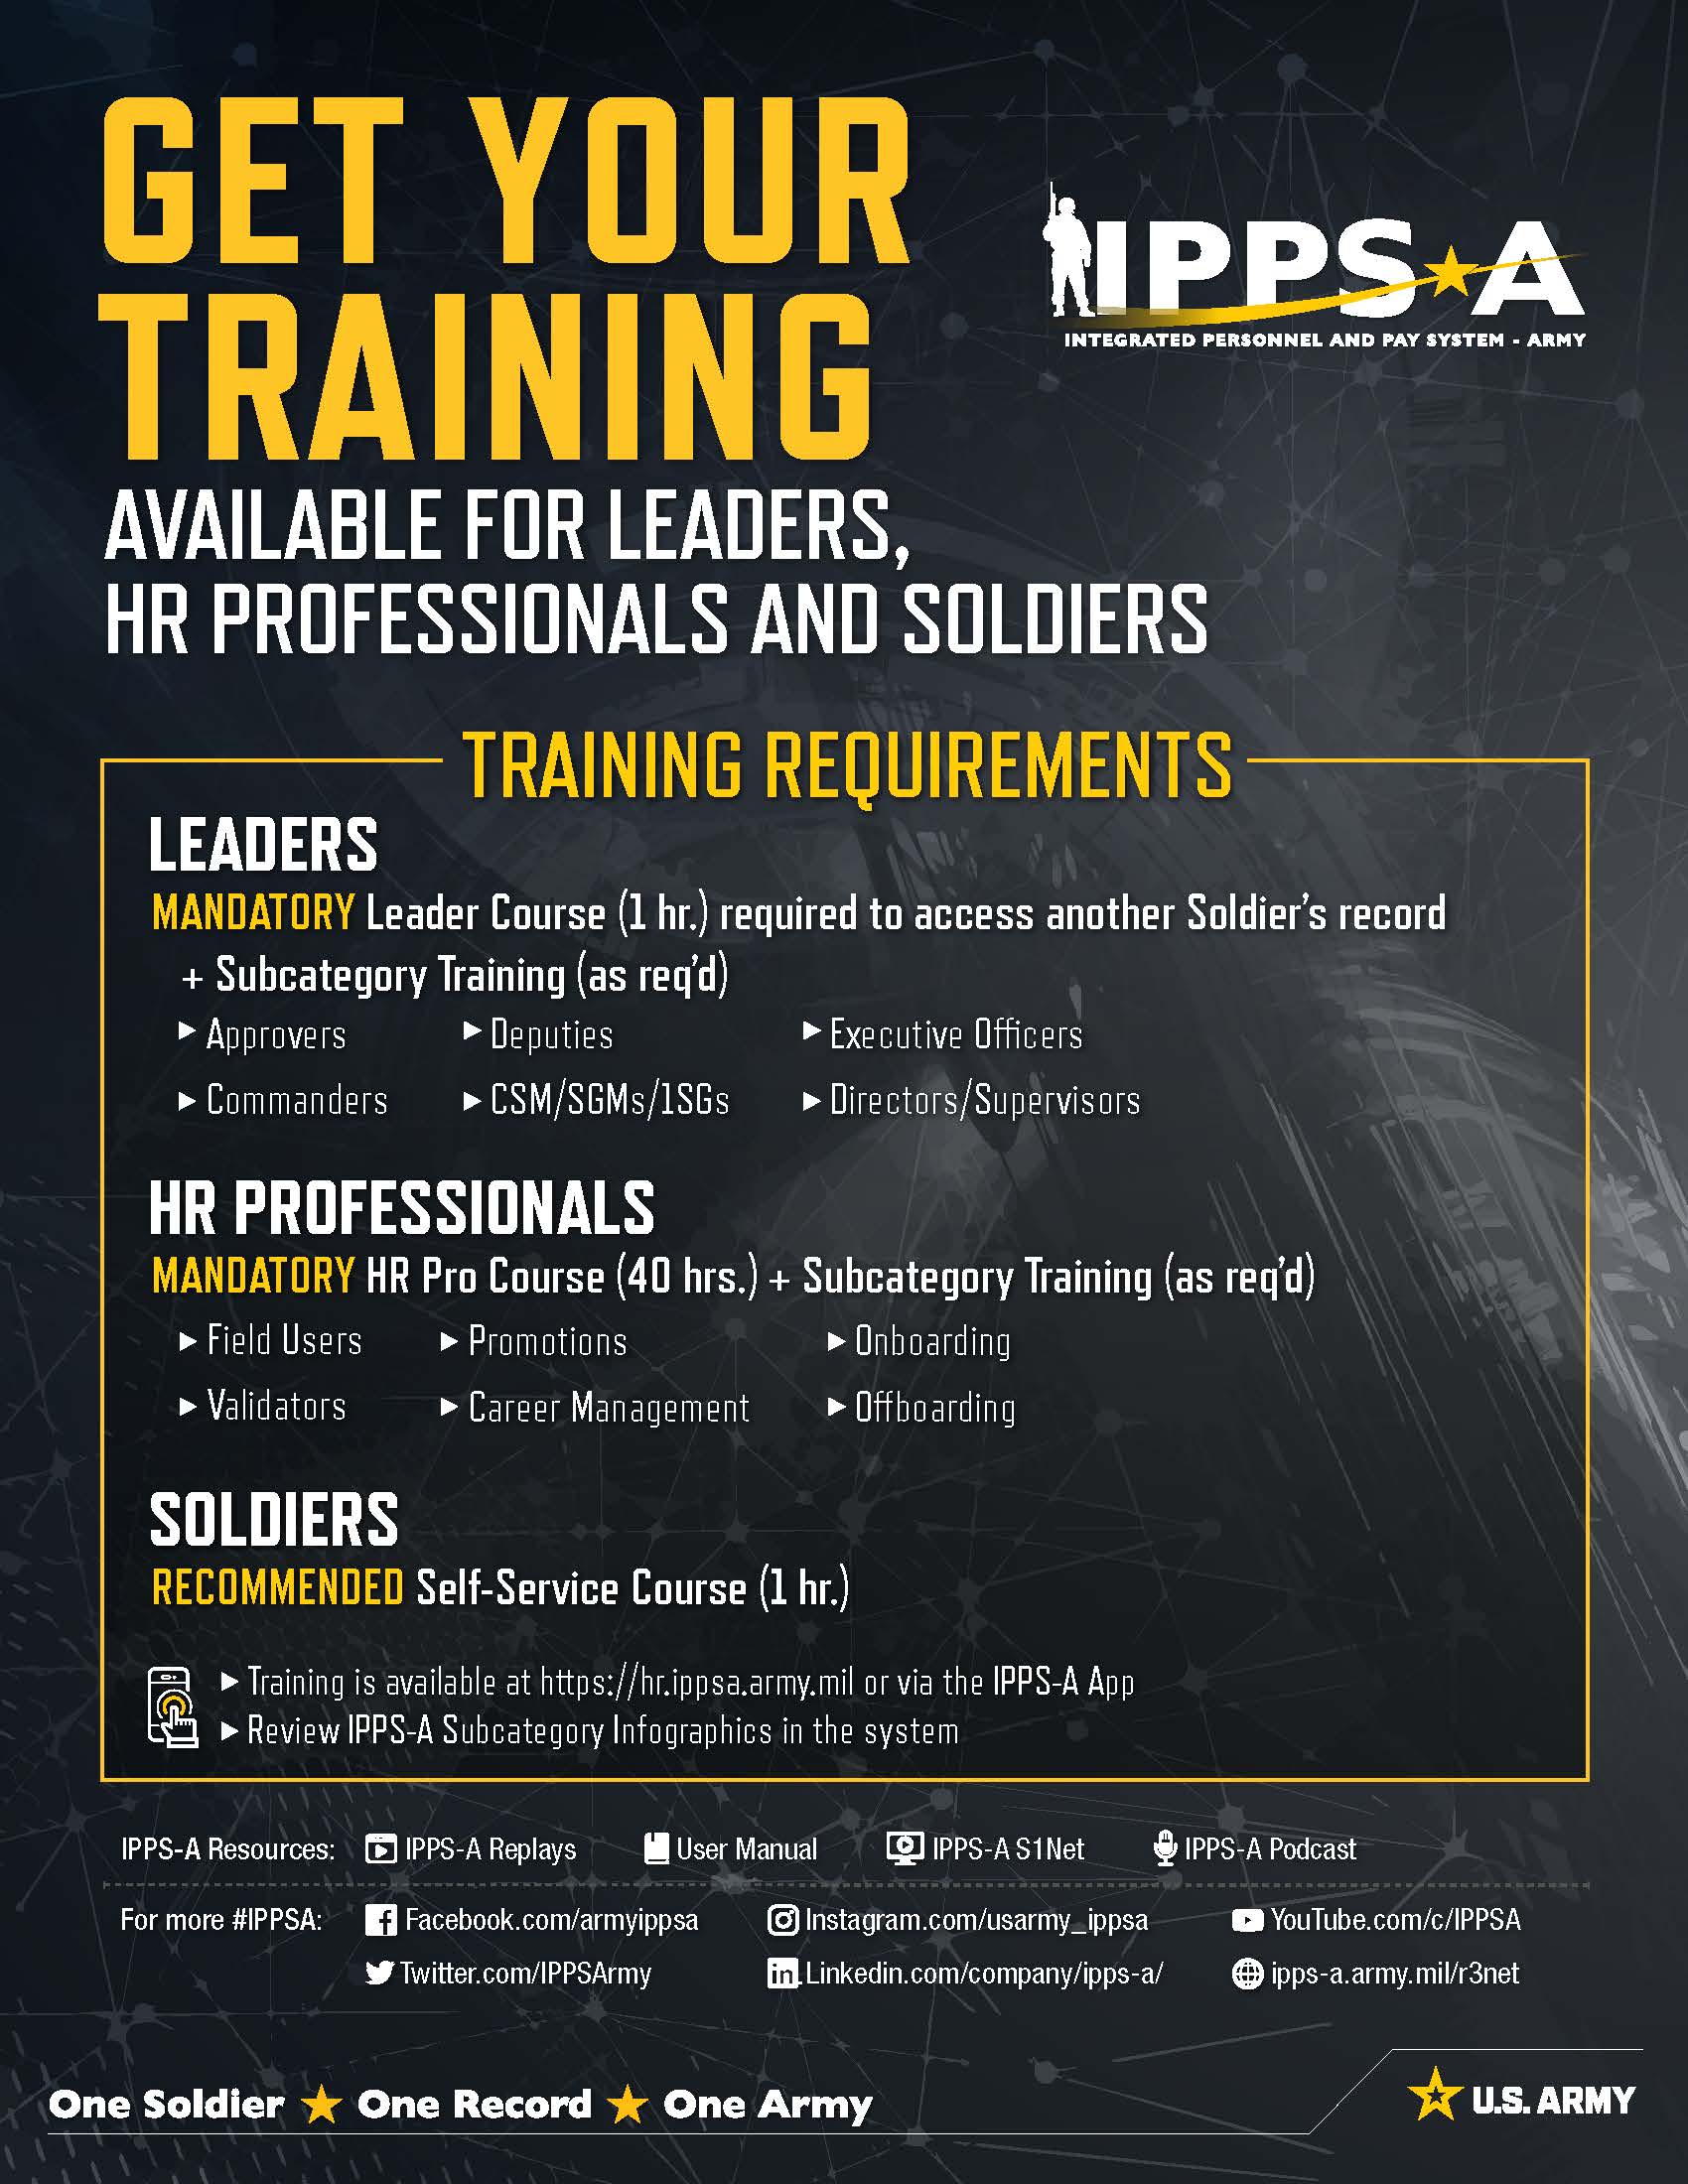 Training poster listing required training for Leaders, HR Professionals and Soldiers